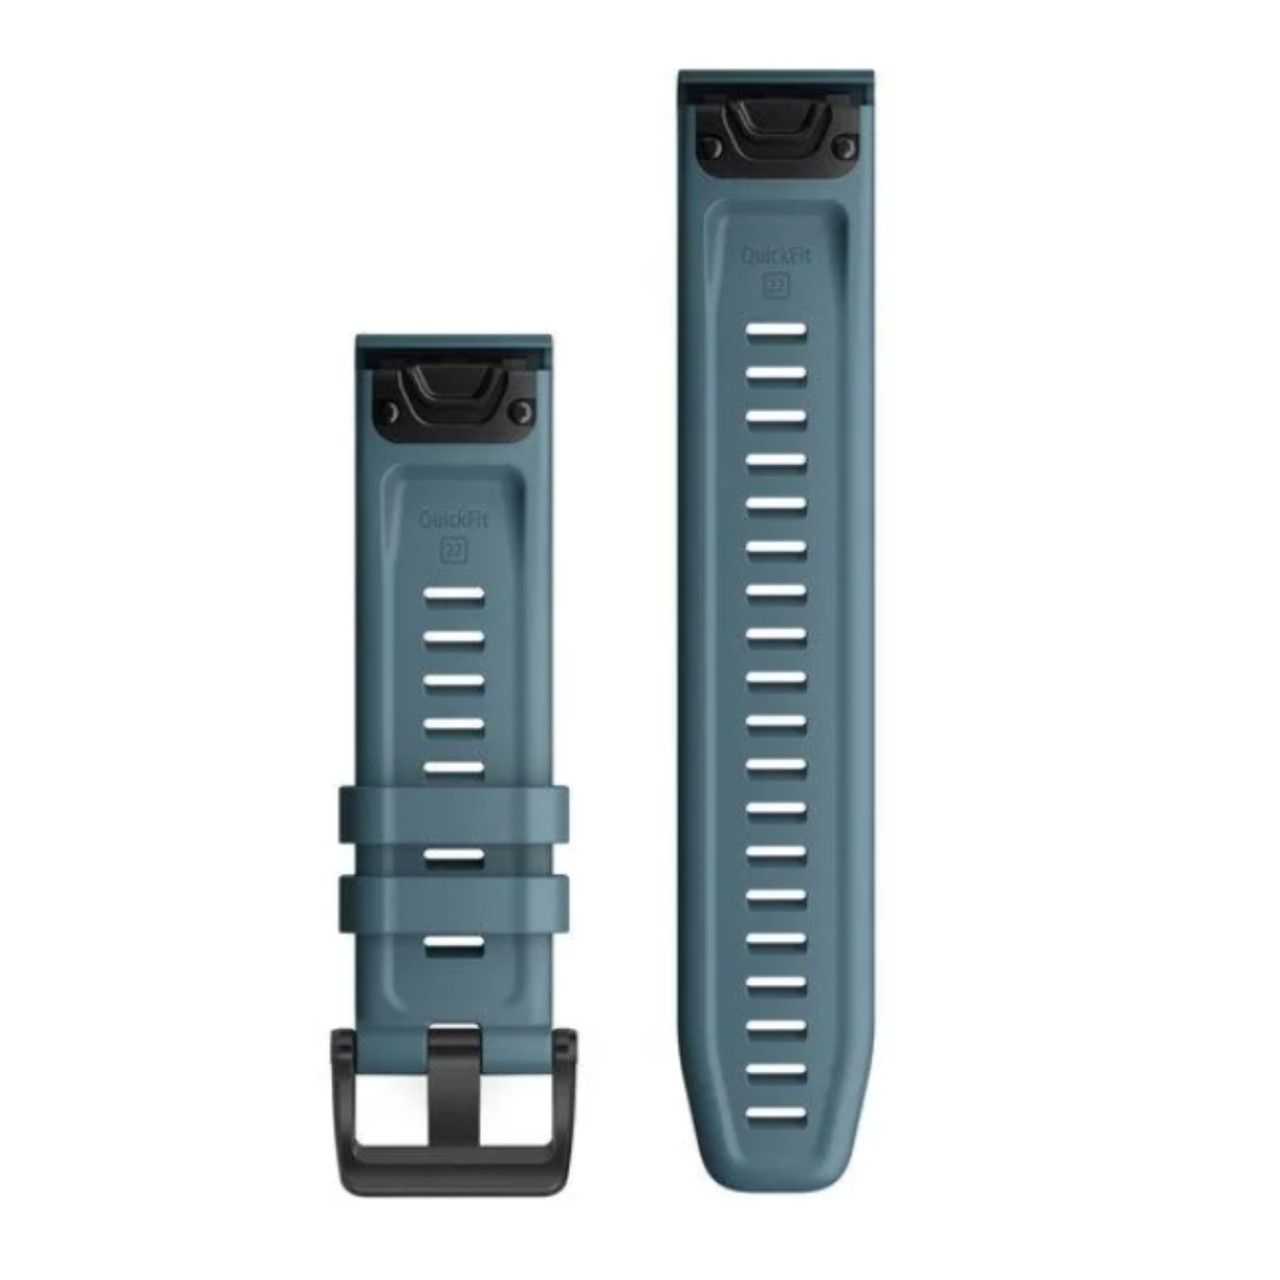 Garmin New OEM QuickFit® 22 Watch Bands Lakeside Blue Silicone, 010-12863-03